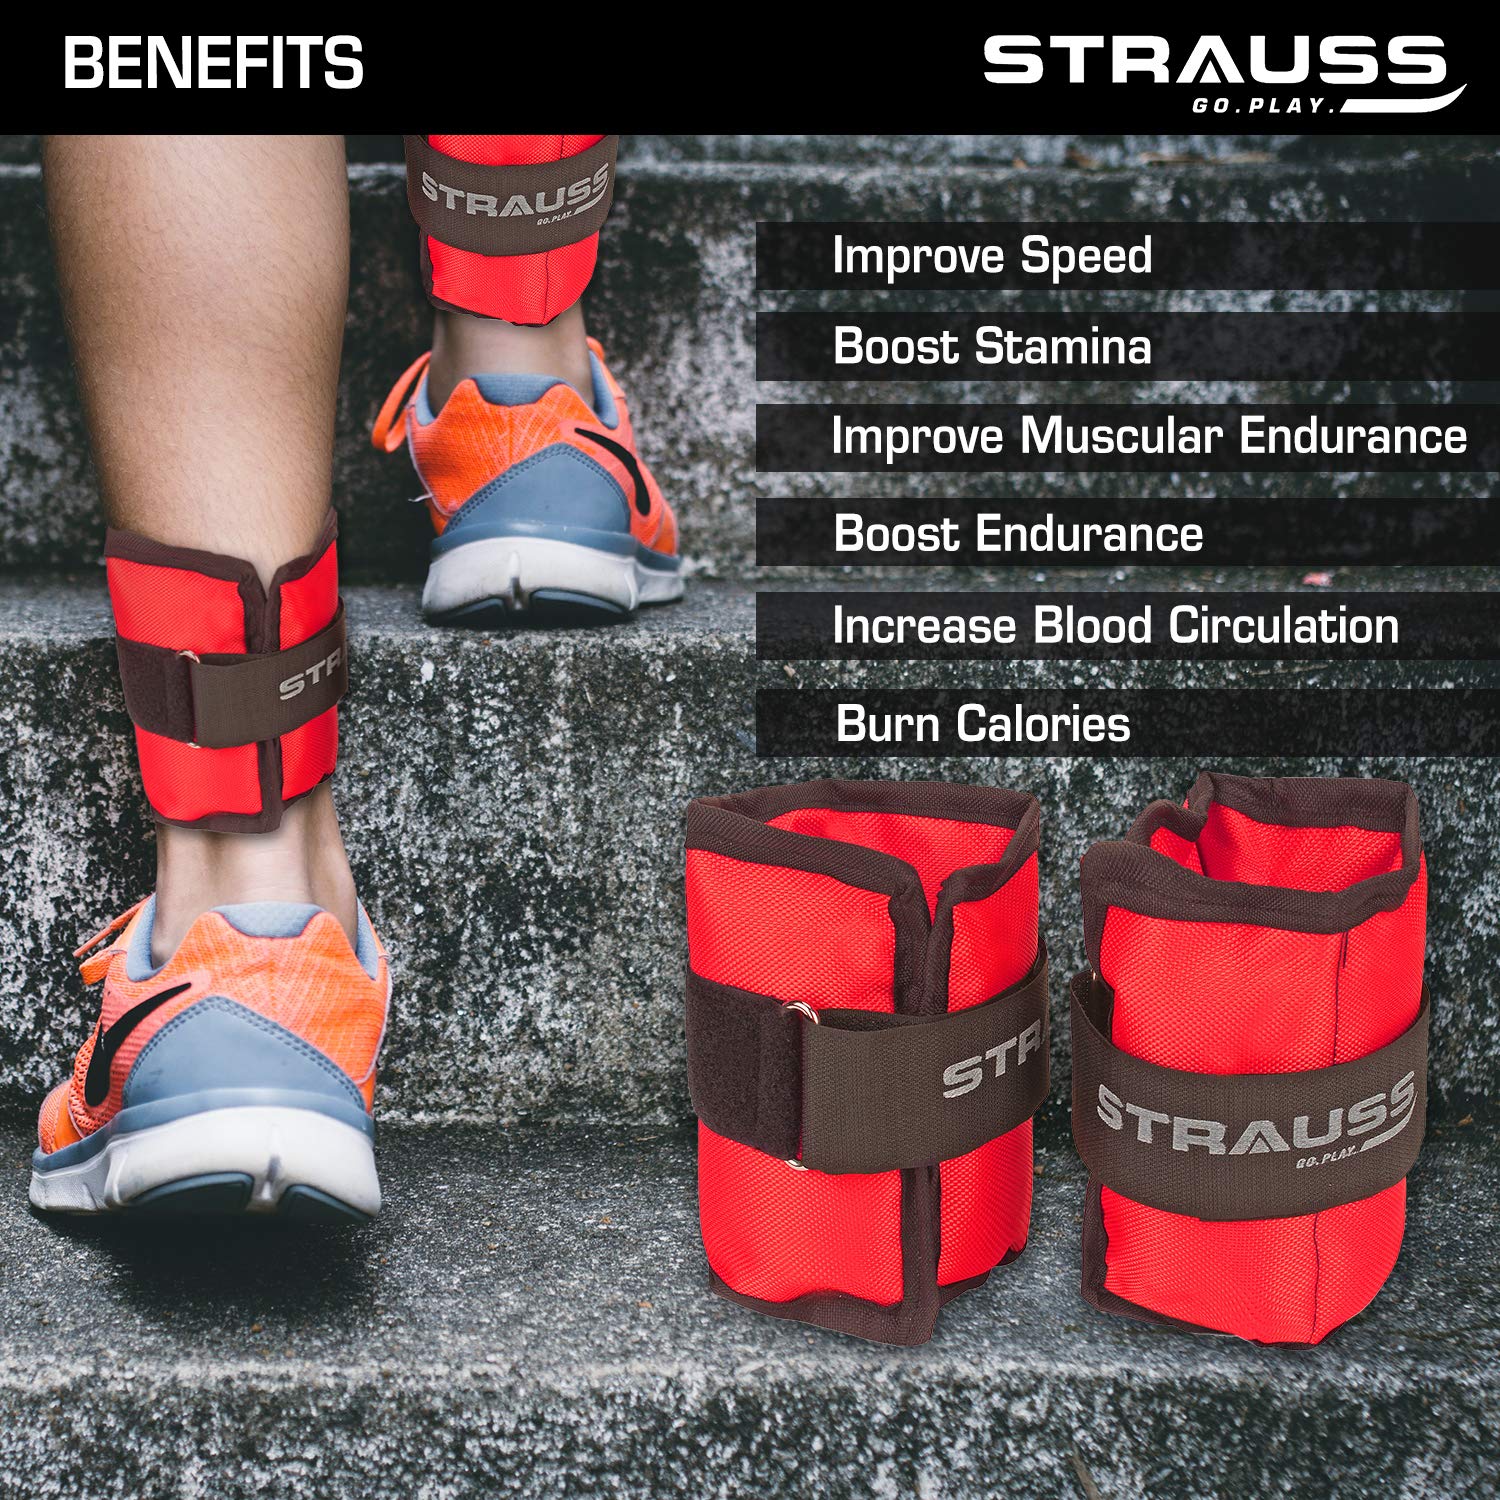 Strauss Ankle Weight, 1 Kg (Each), Pair, (Red)